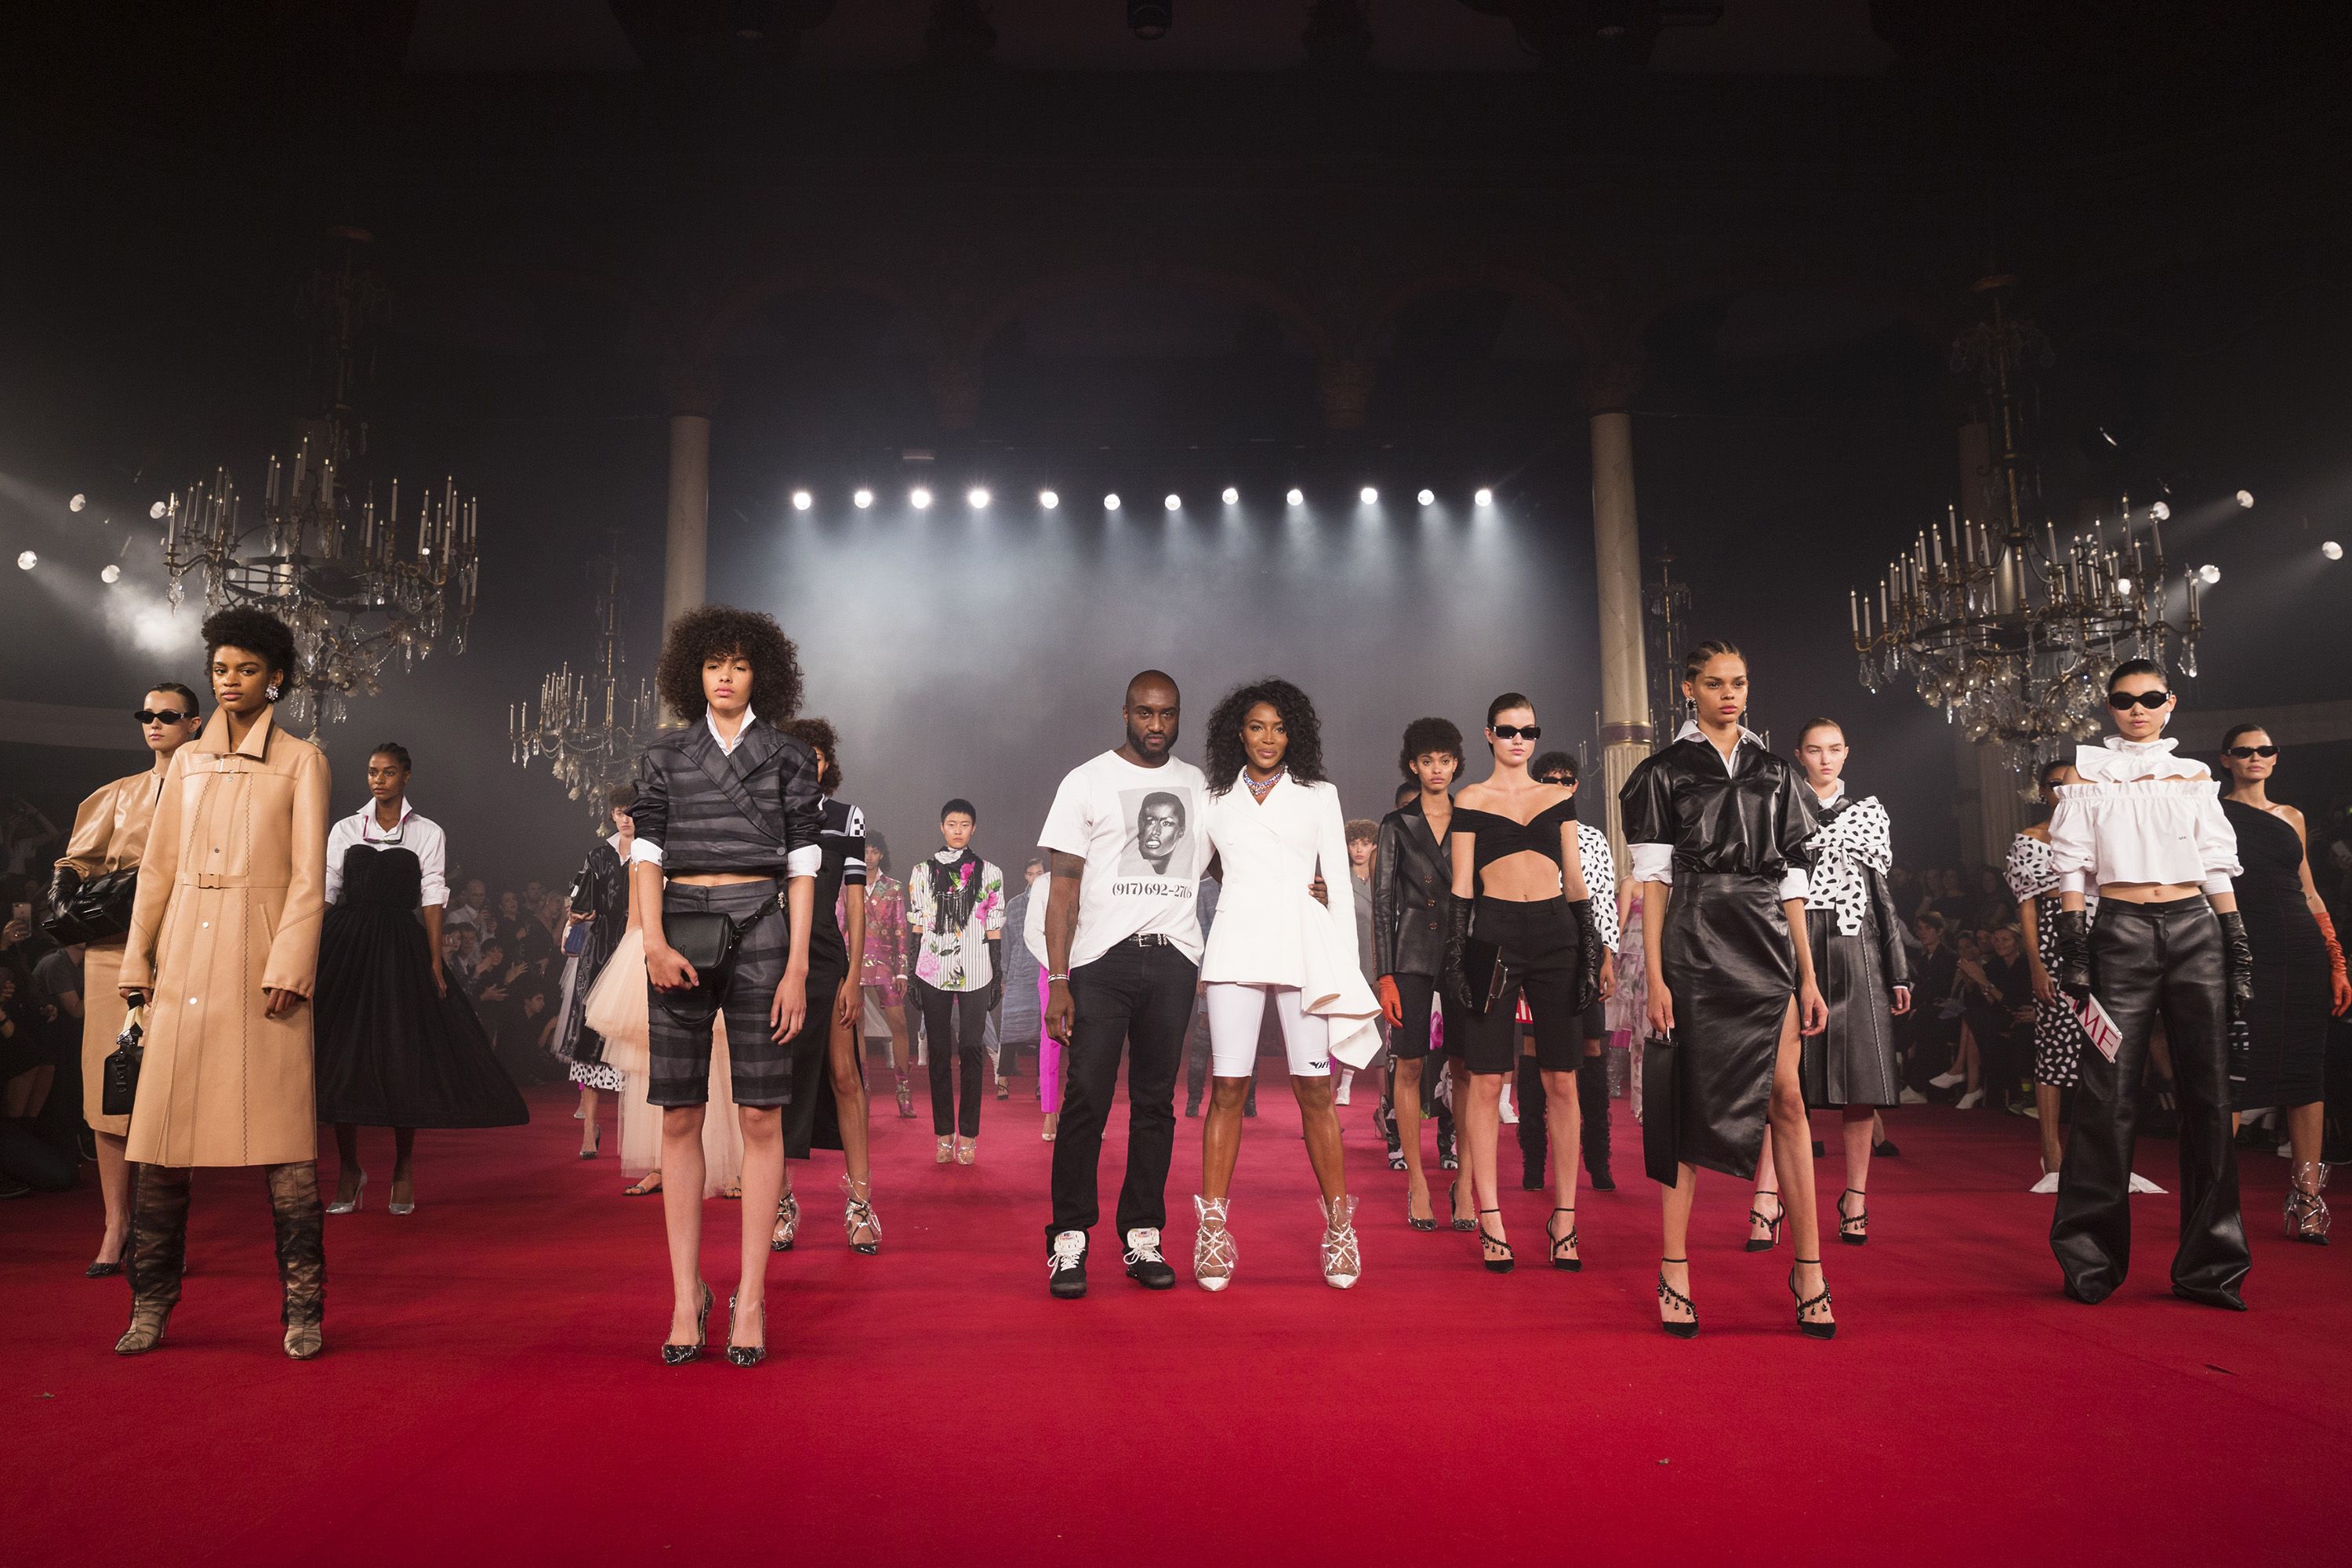 Virgil Abloh Appointed As New Louis Vuitton Creative Director